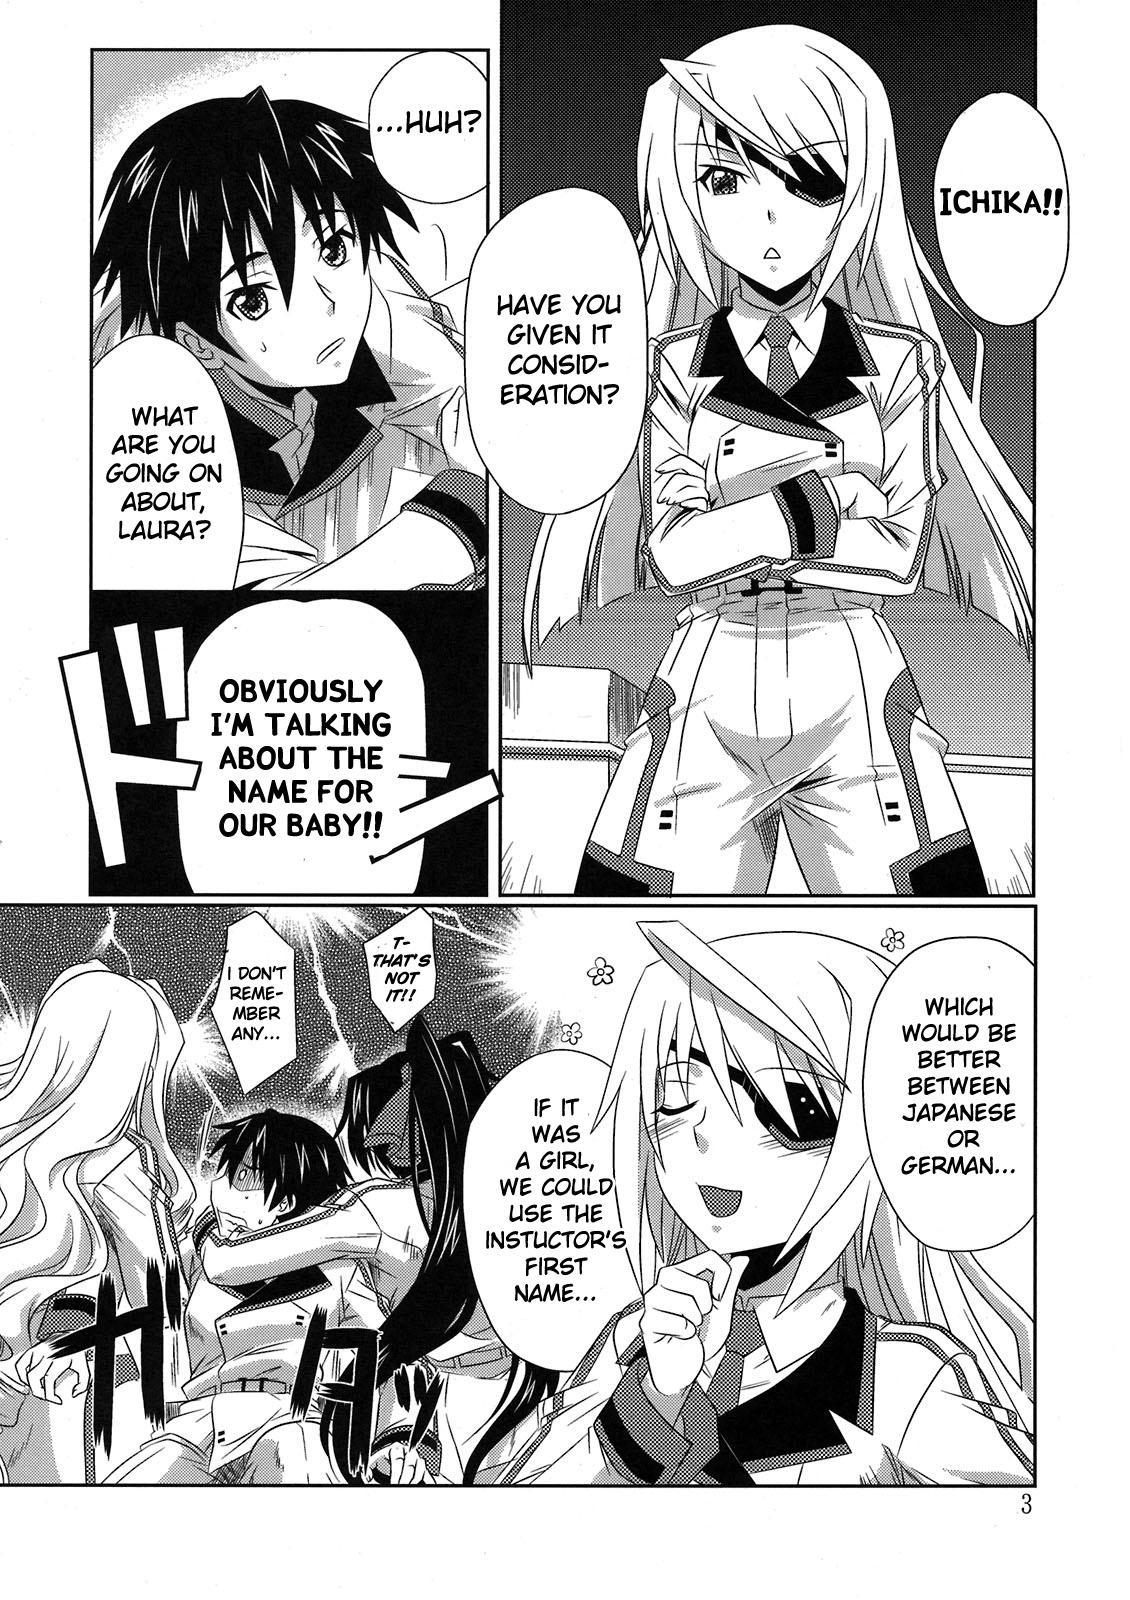 Interracial Porn is Incest Strategy - Infinite stratos Hole - Page 3